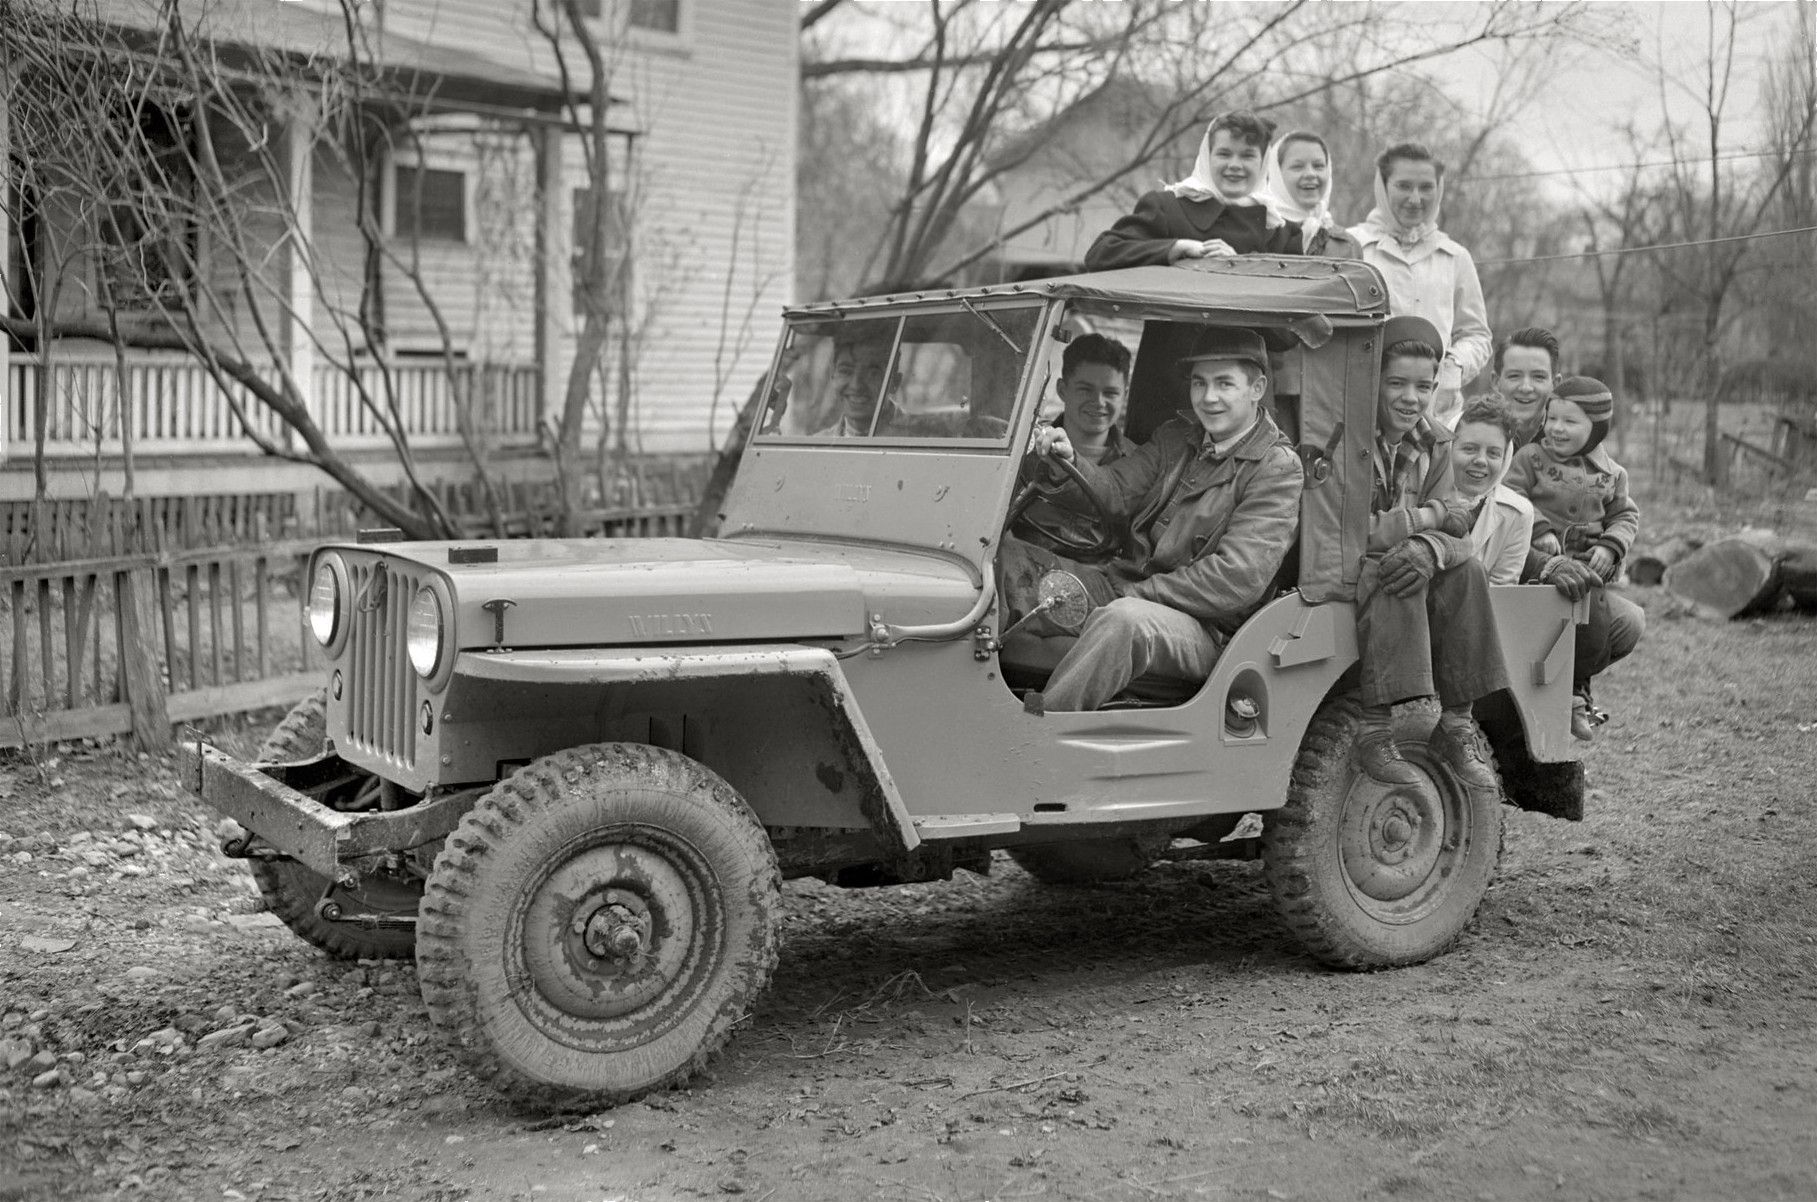 A Willys Jeep in New York, 1943. [Image via Flickr]